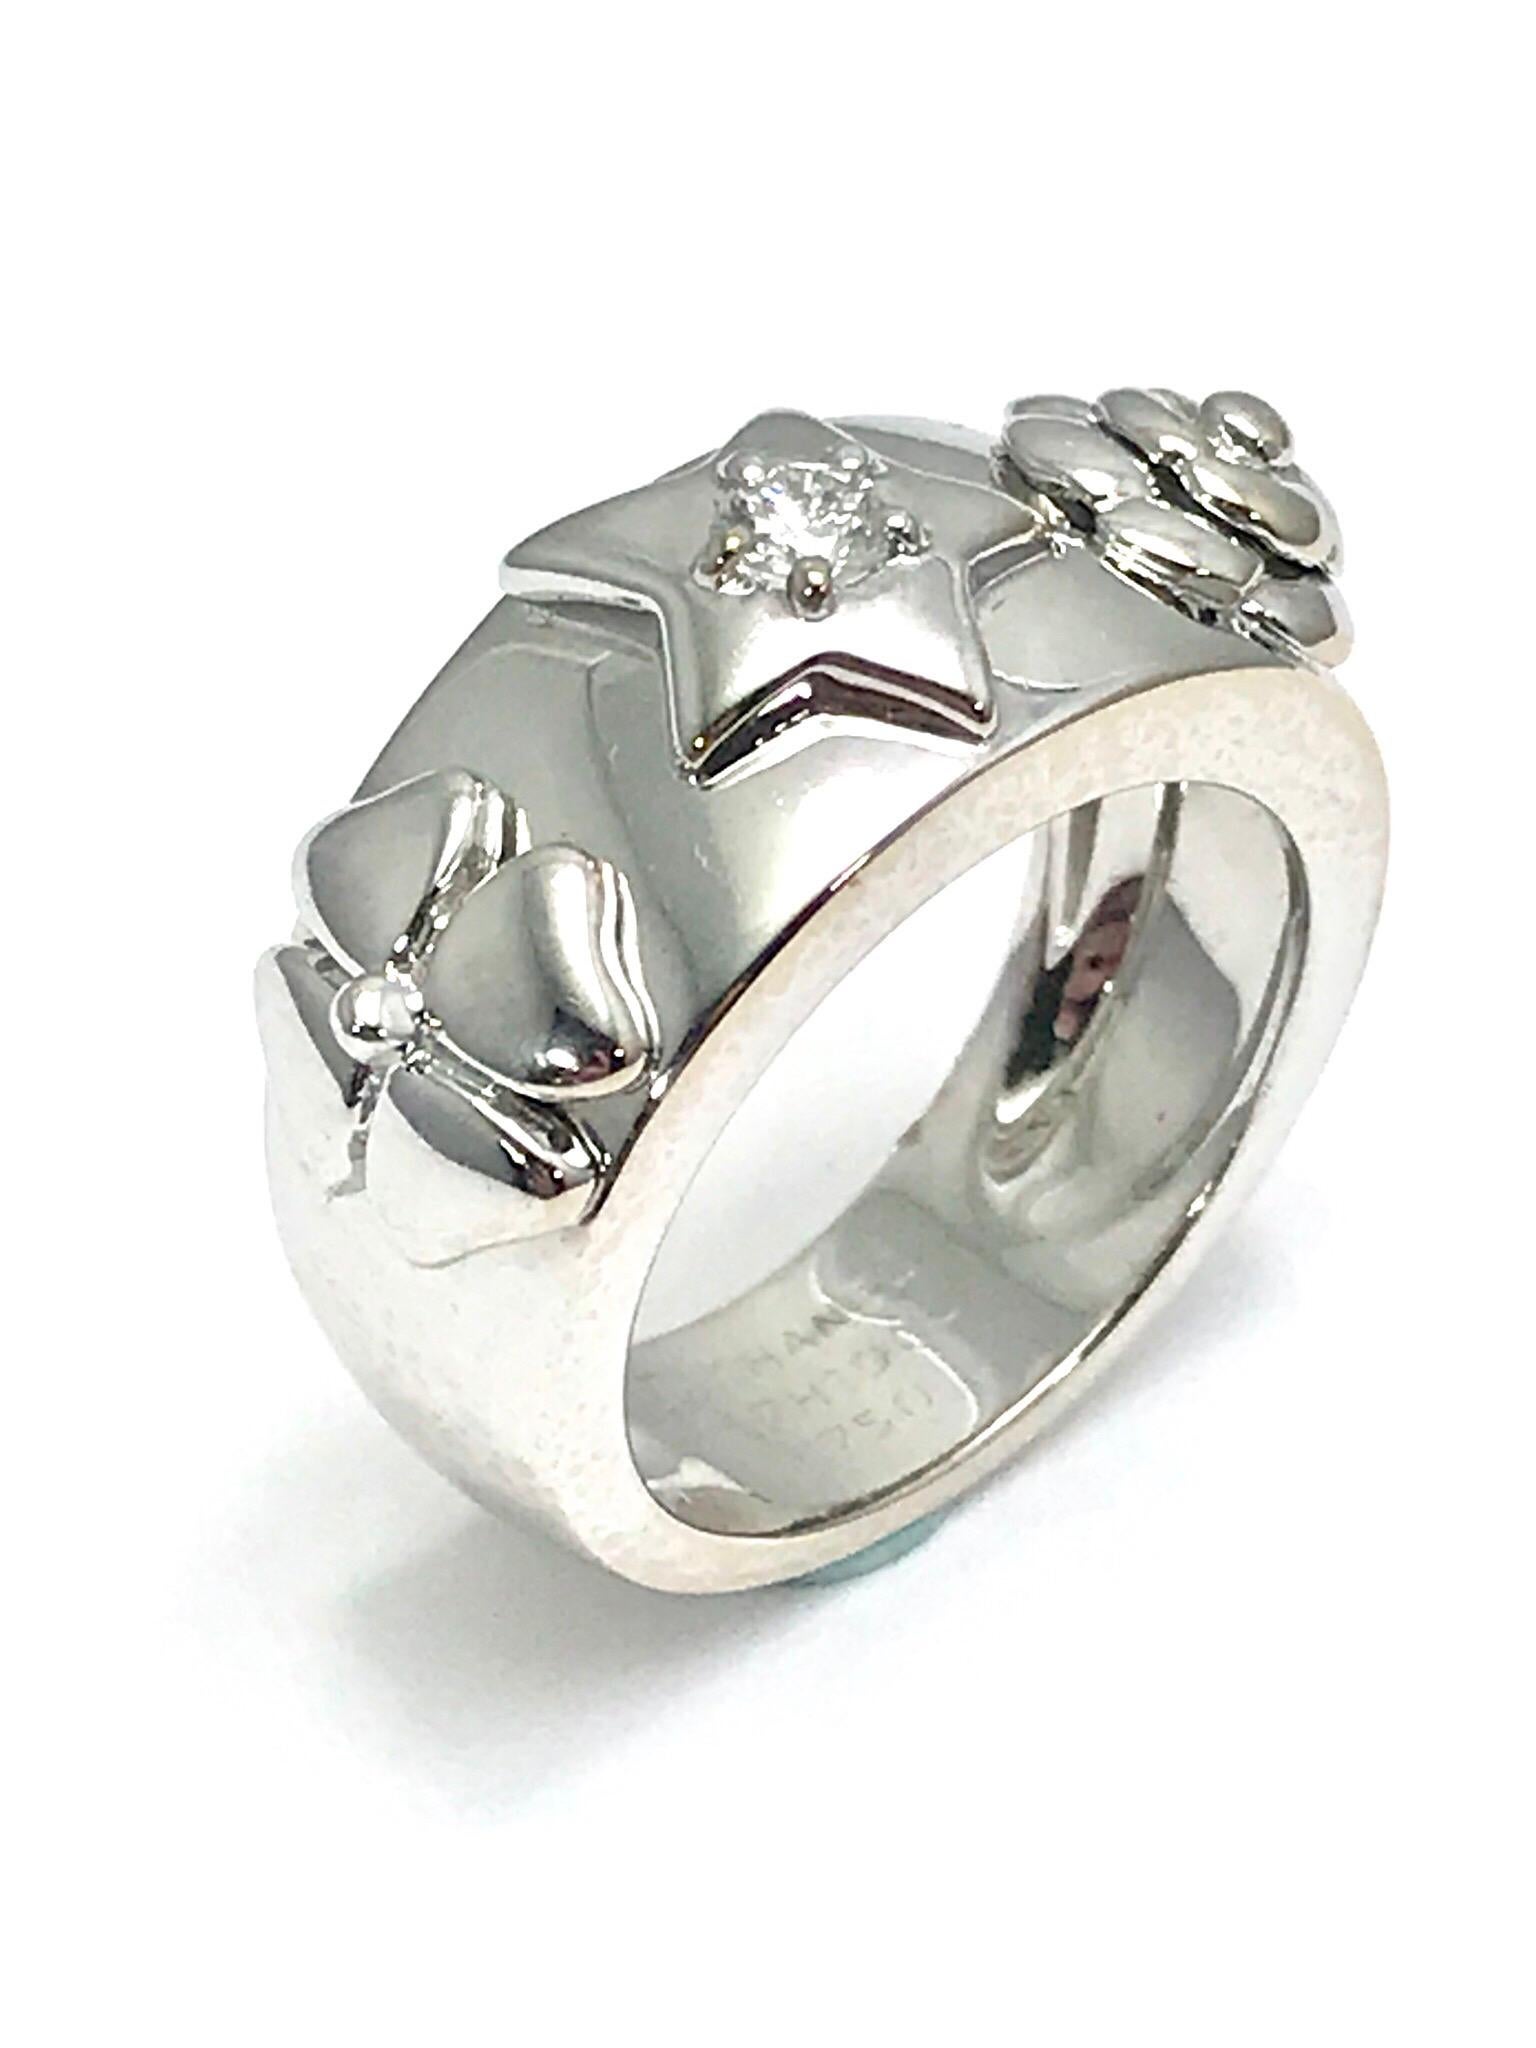 This is a great, easy to wear piece.  A Chanel Camelia Diamond star, flower and four leaf clover 18 karat white gold band ring.  The round brilliant diamond is set with five prongs, and weighs 0.10 carats,  graded as F color, VS1 clarity.  The ring